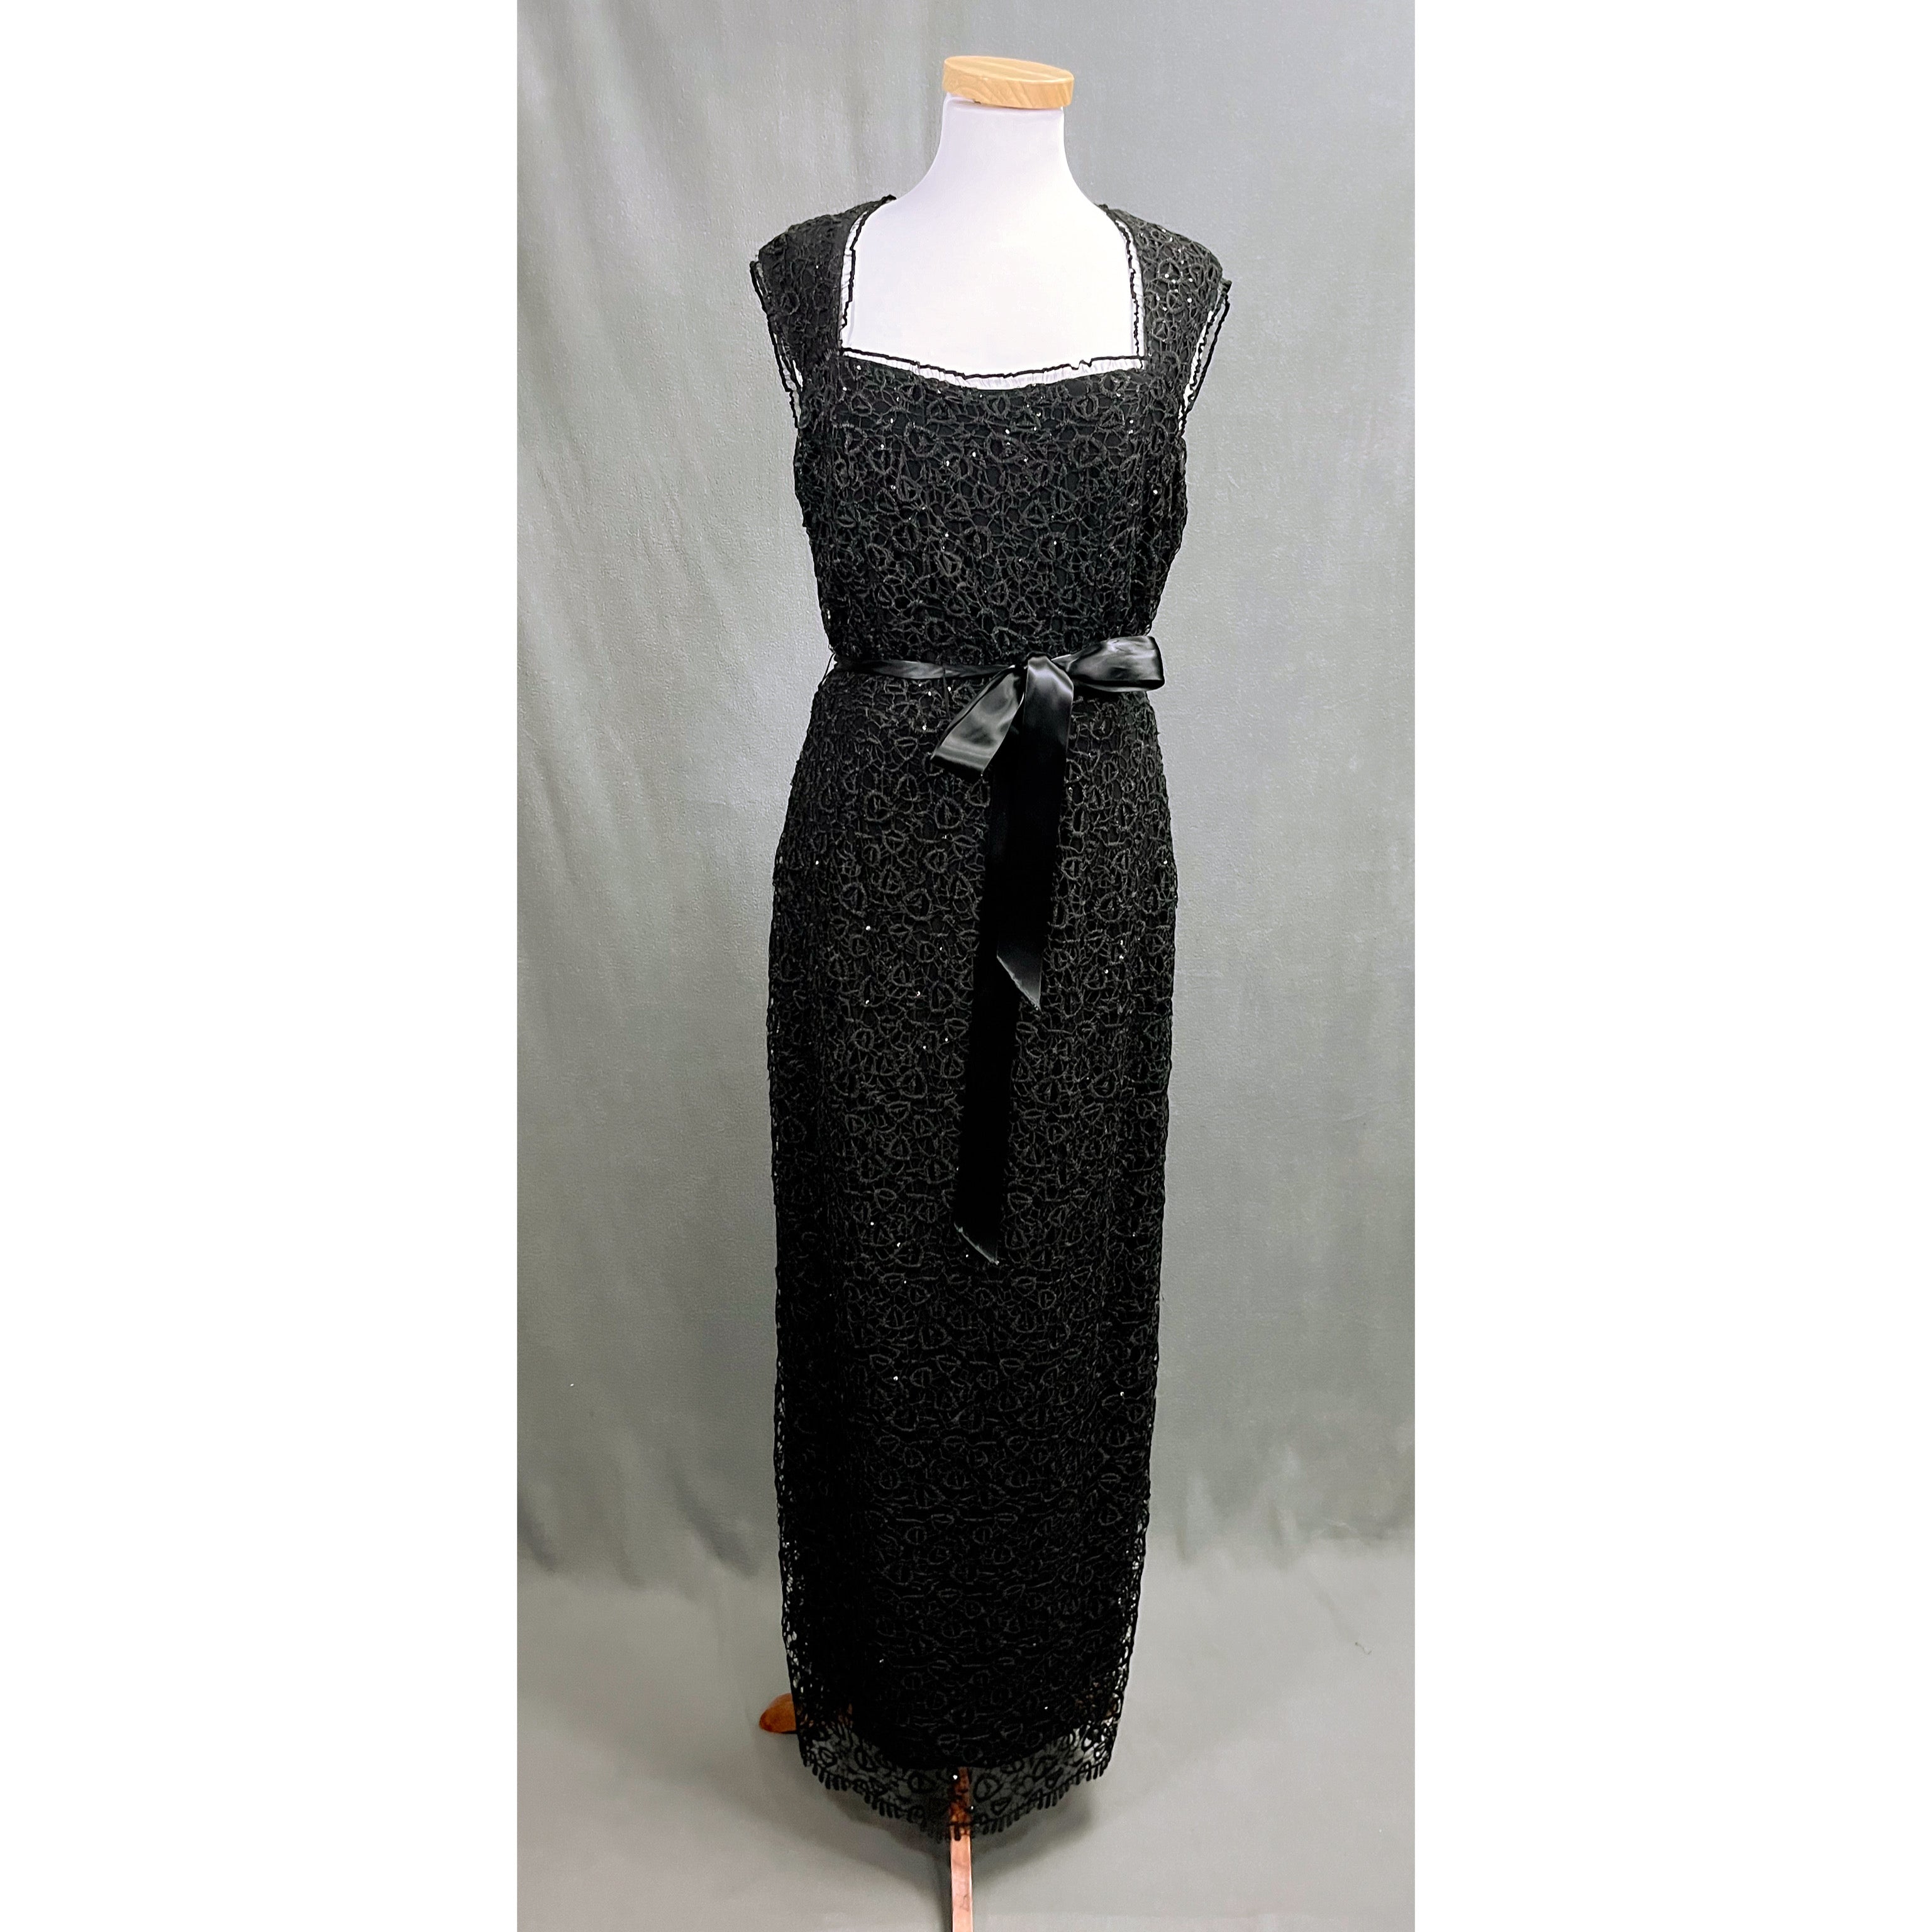 Frank Lyman black lace dress, size 12, NEW WITH TAGS!